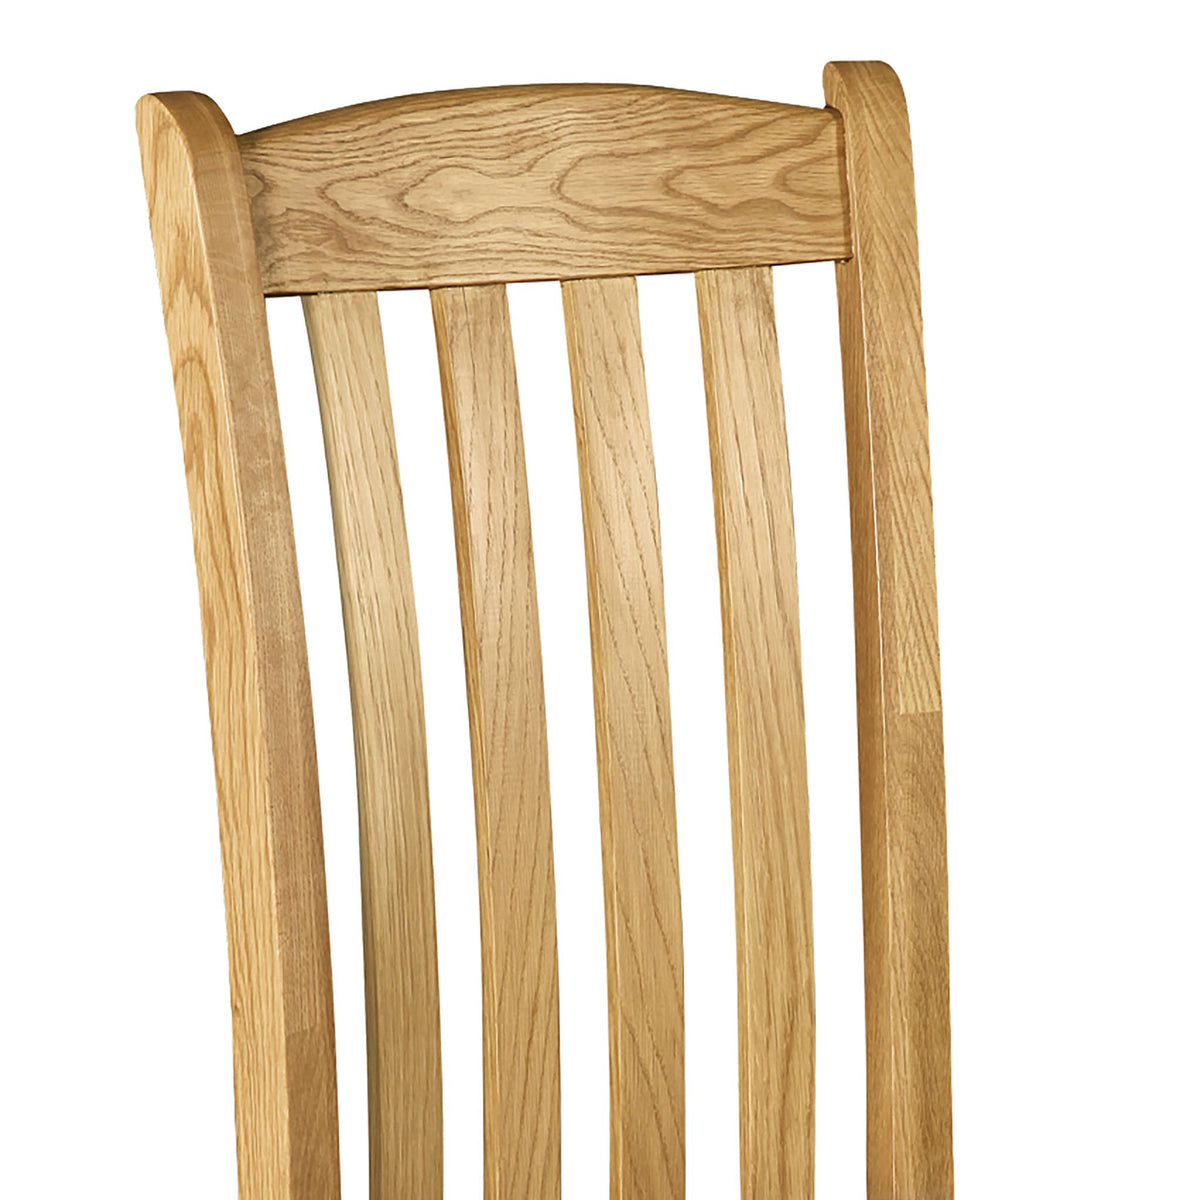 Zelah Oak Slatted Back Dining Chair - Close Up of Back of Chair